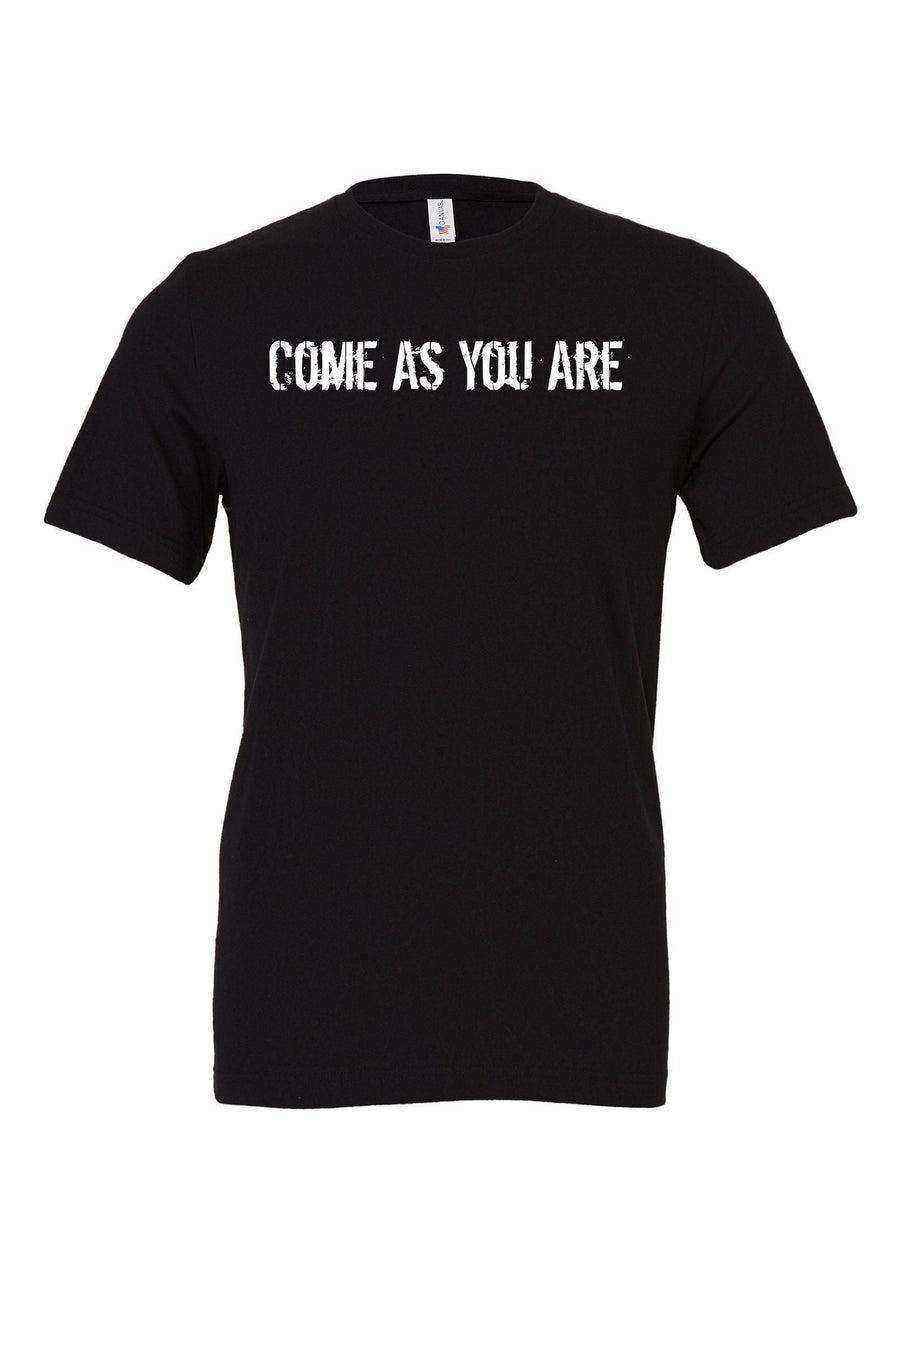 Come As You Are Shirt | 90s Grunge Bands - Dylan's Tees